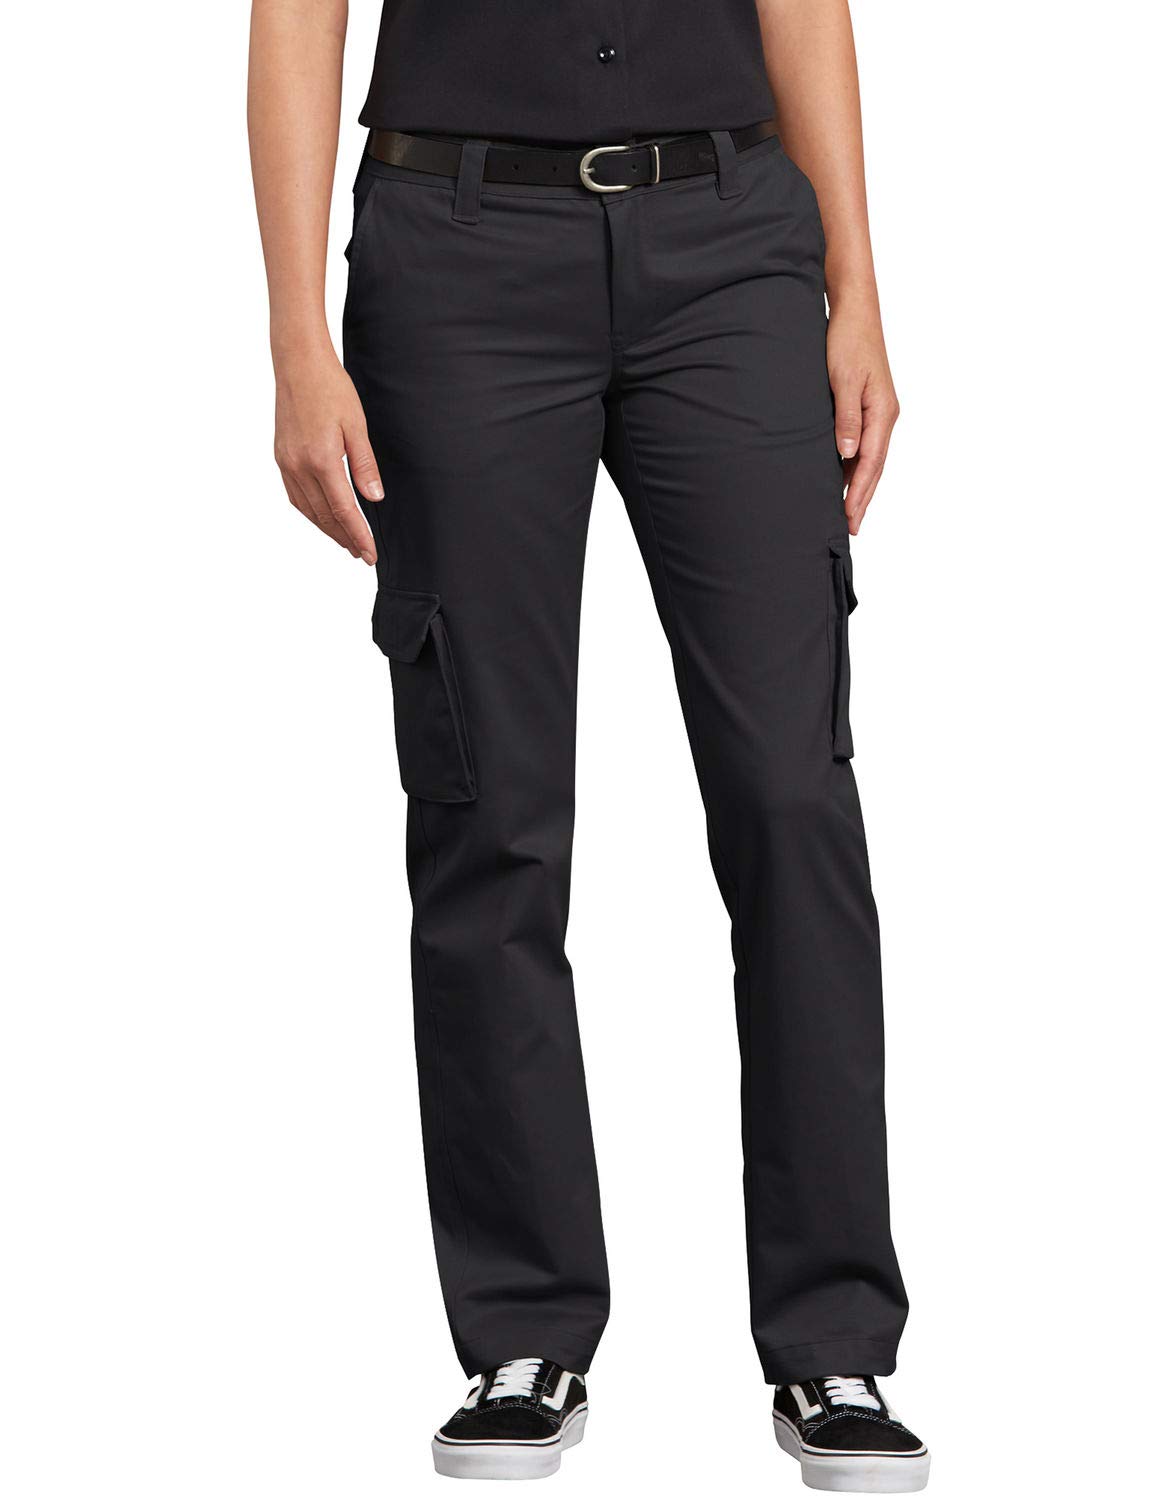 Dickies Damen Relaxed Fit Stretch Cargo Straight Leg Pant Arbeitshose, schwarz, 40